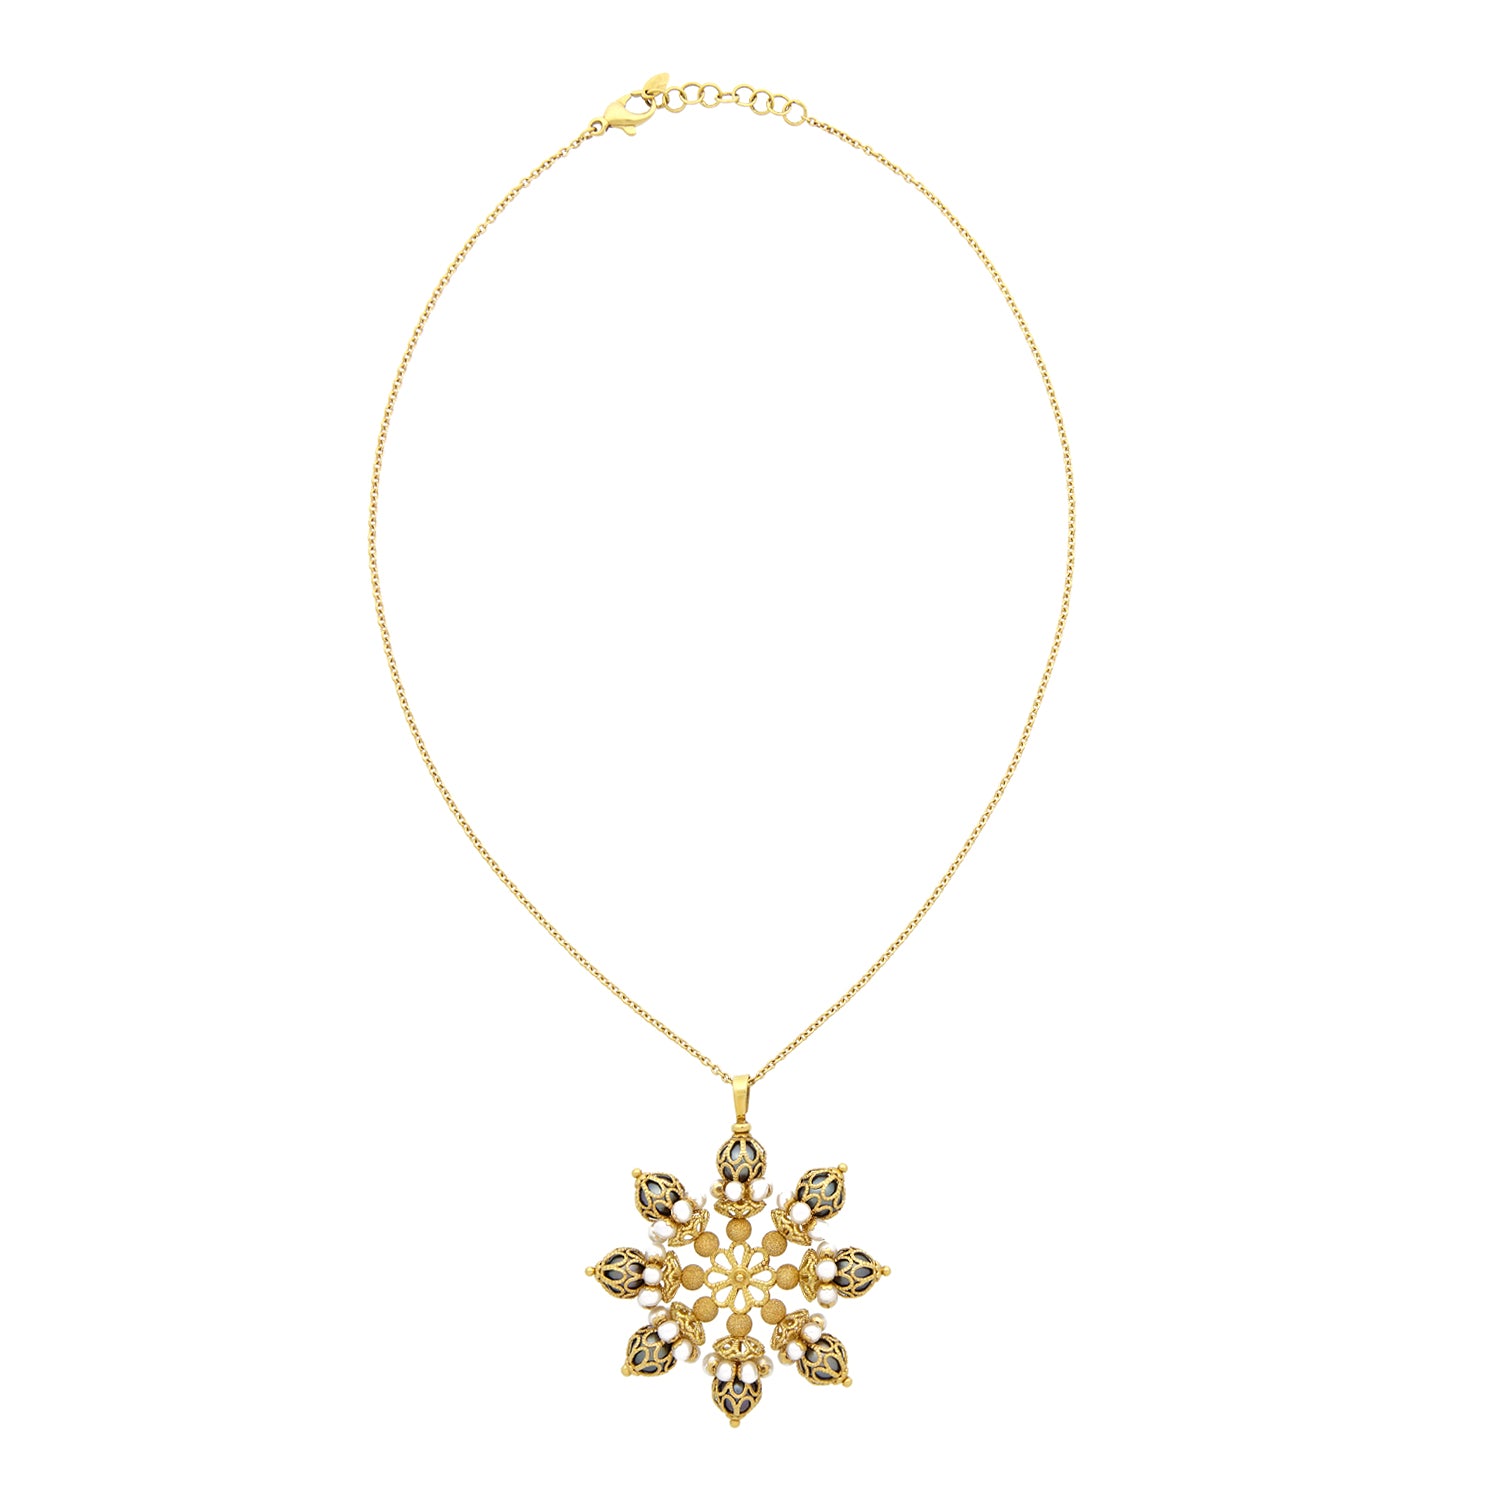 YELLOW GOLD NECKLACE WITH STAR SHAPE PENDANT